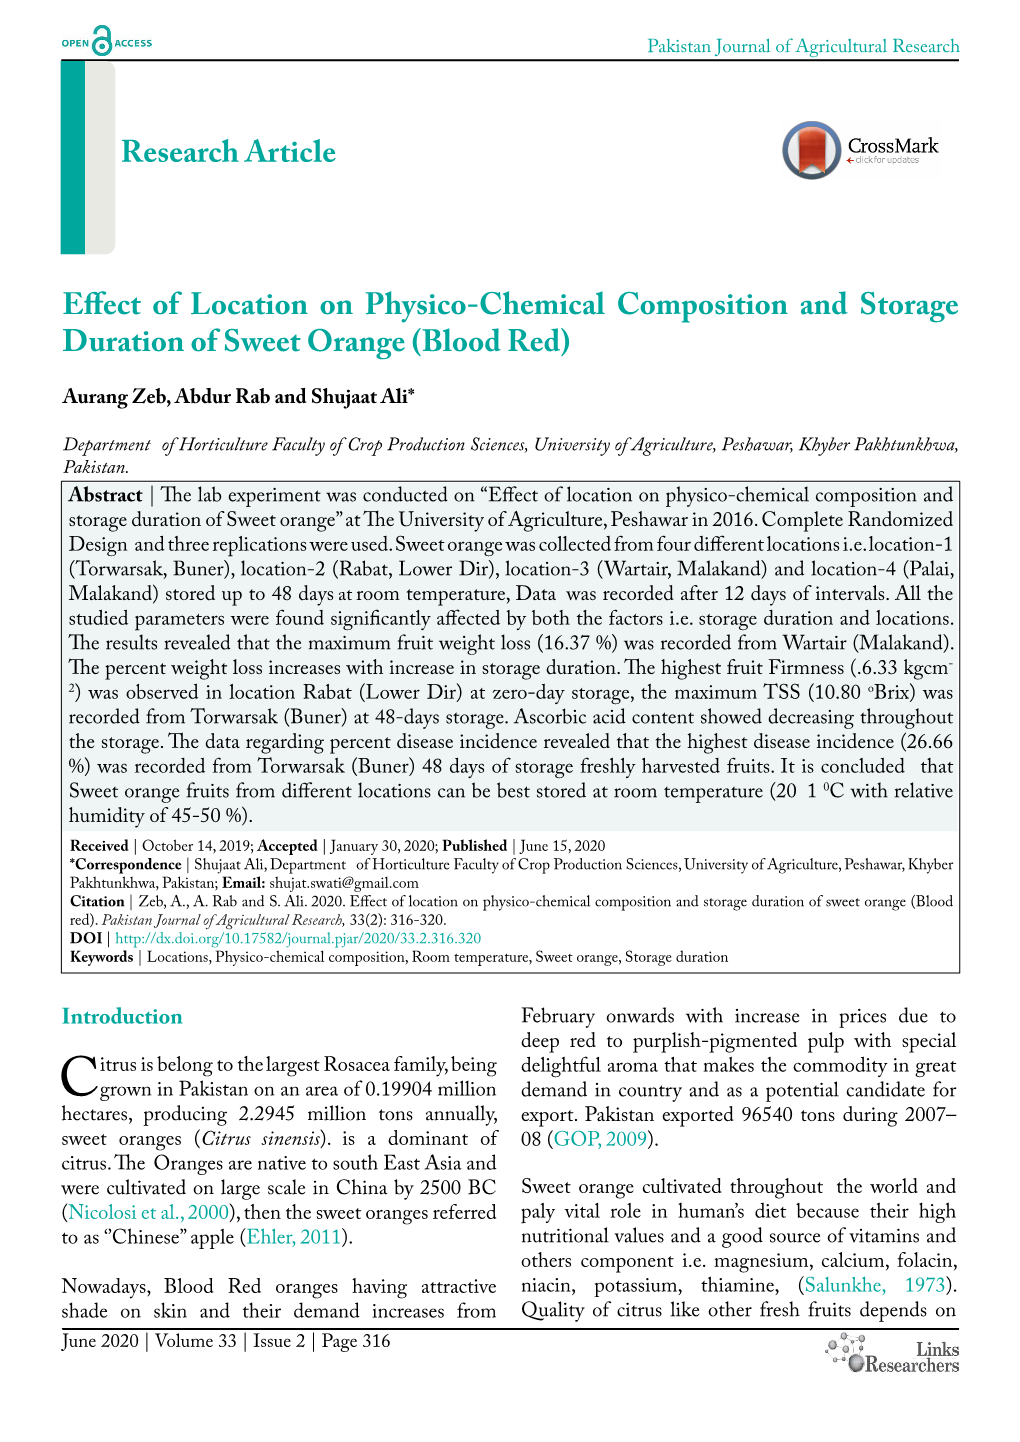 Research Article Effect of Location on Physico-Chemical